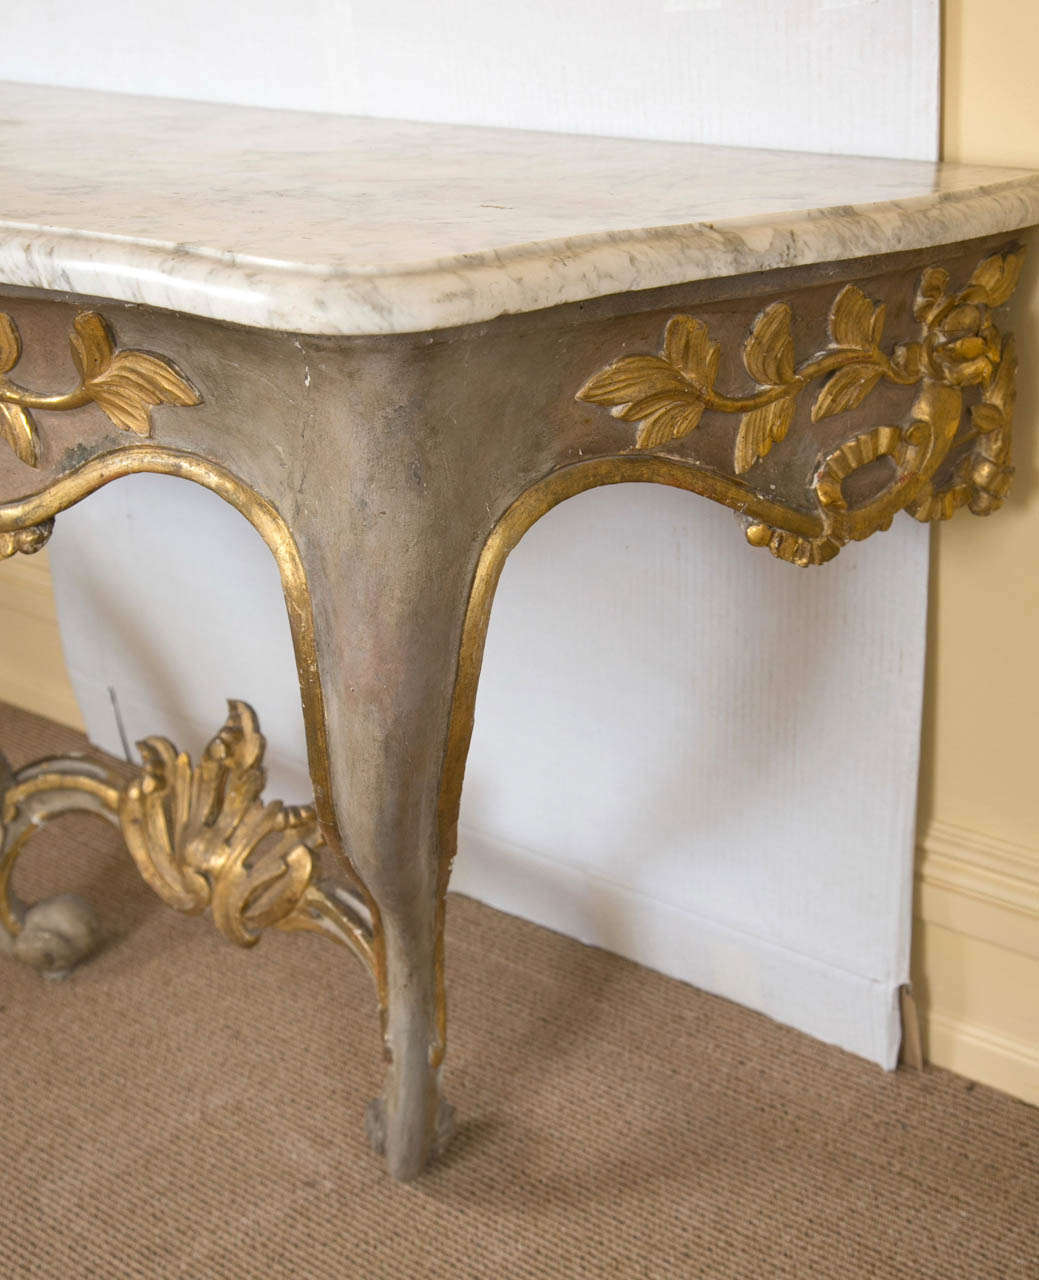 Louis XVI Later Painted Decorated Console d' Applique, 18th century For Sale 1